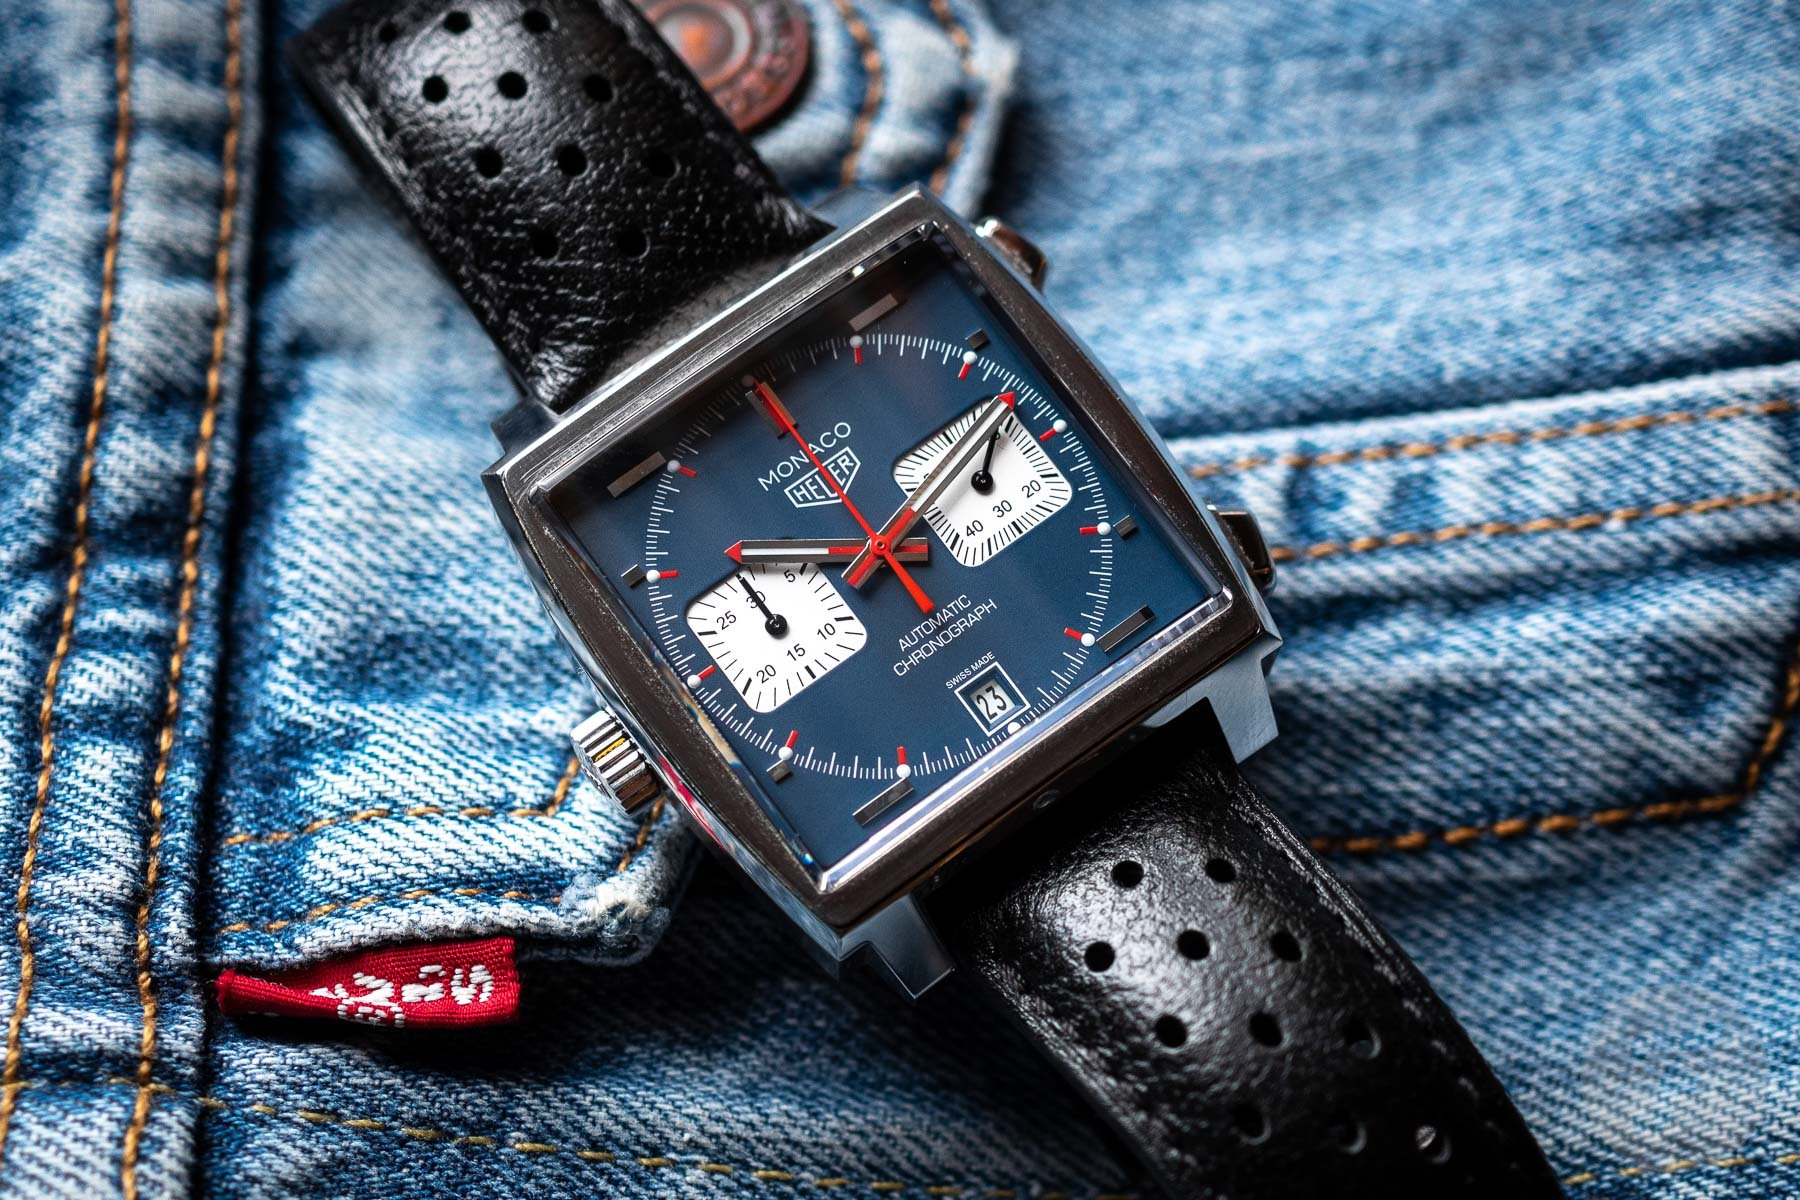 It’s Hip To Be Square ? Six Examples Of Angular Cool From Cartier, TAG Heuer, Nomos, And More